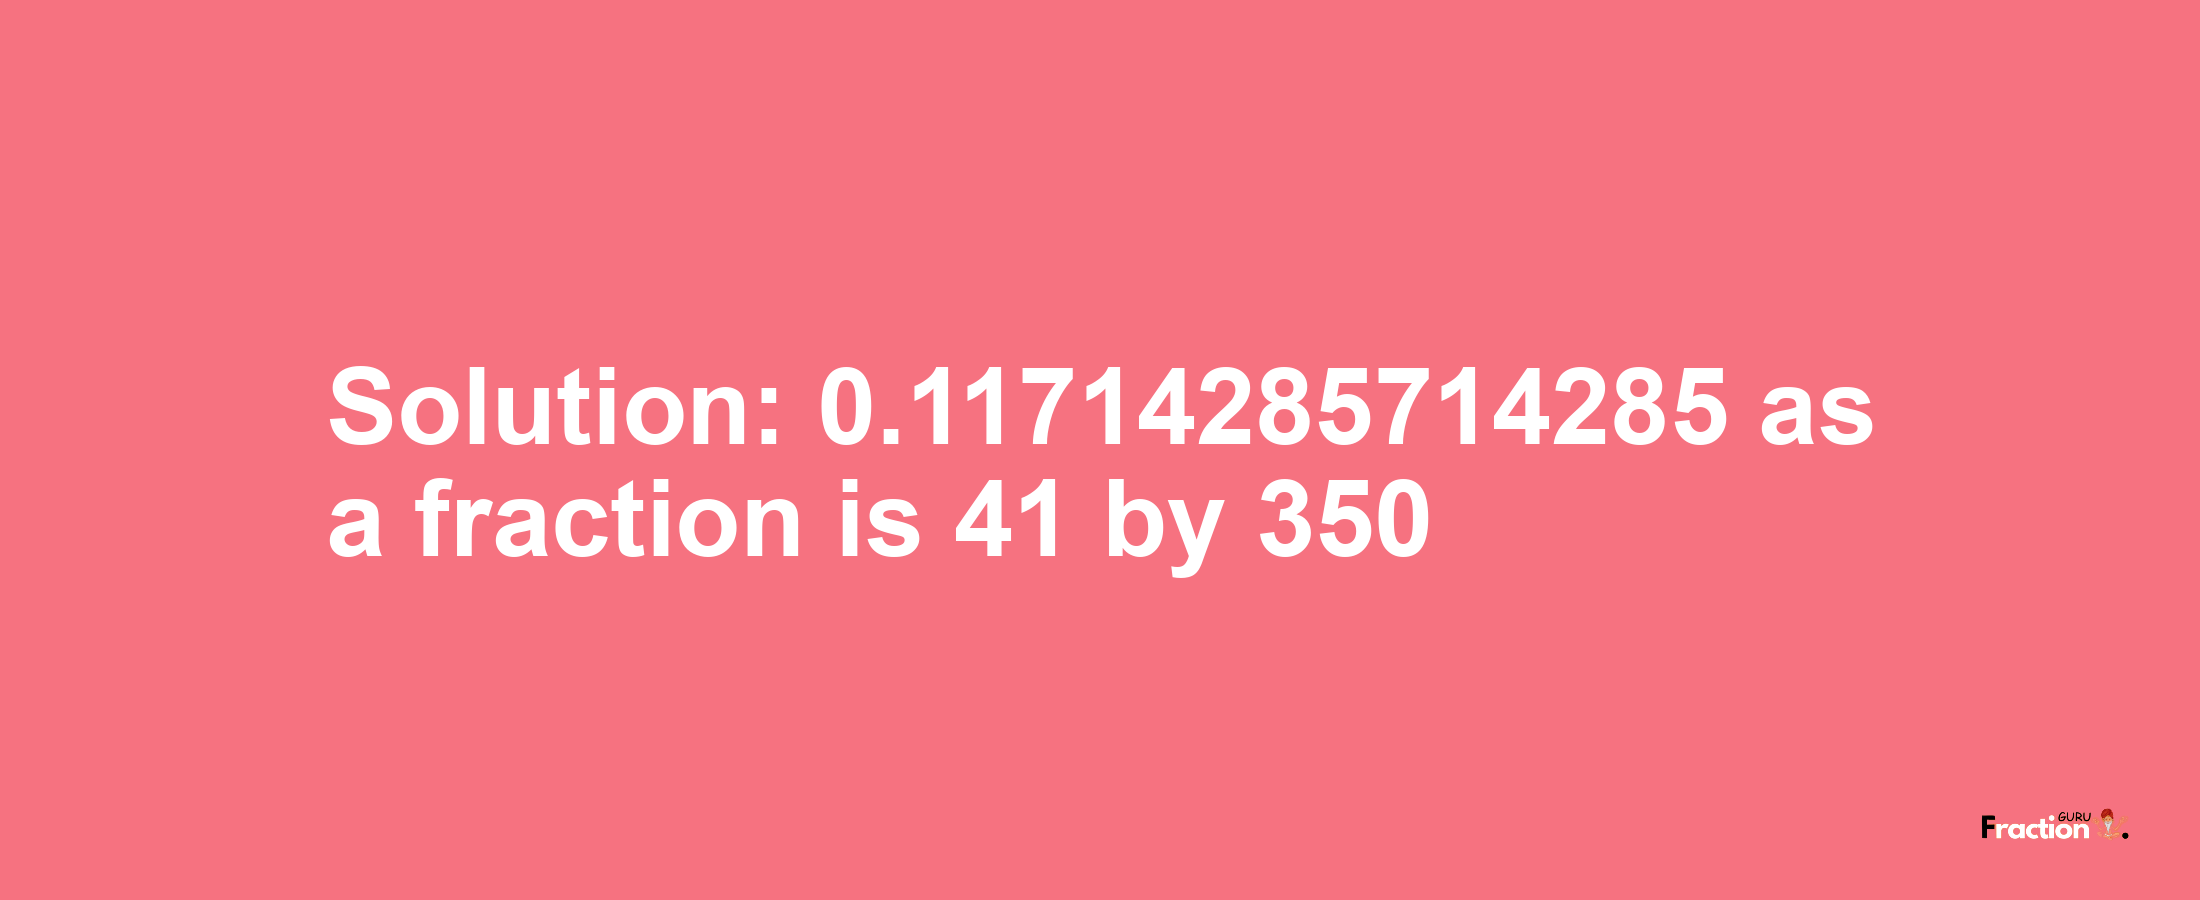 Solution:0.11714285714285 as a fraction is 41/350